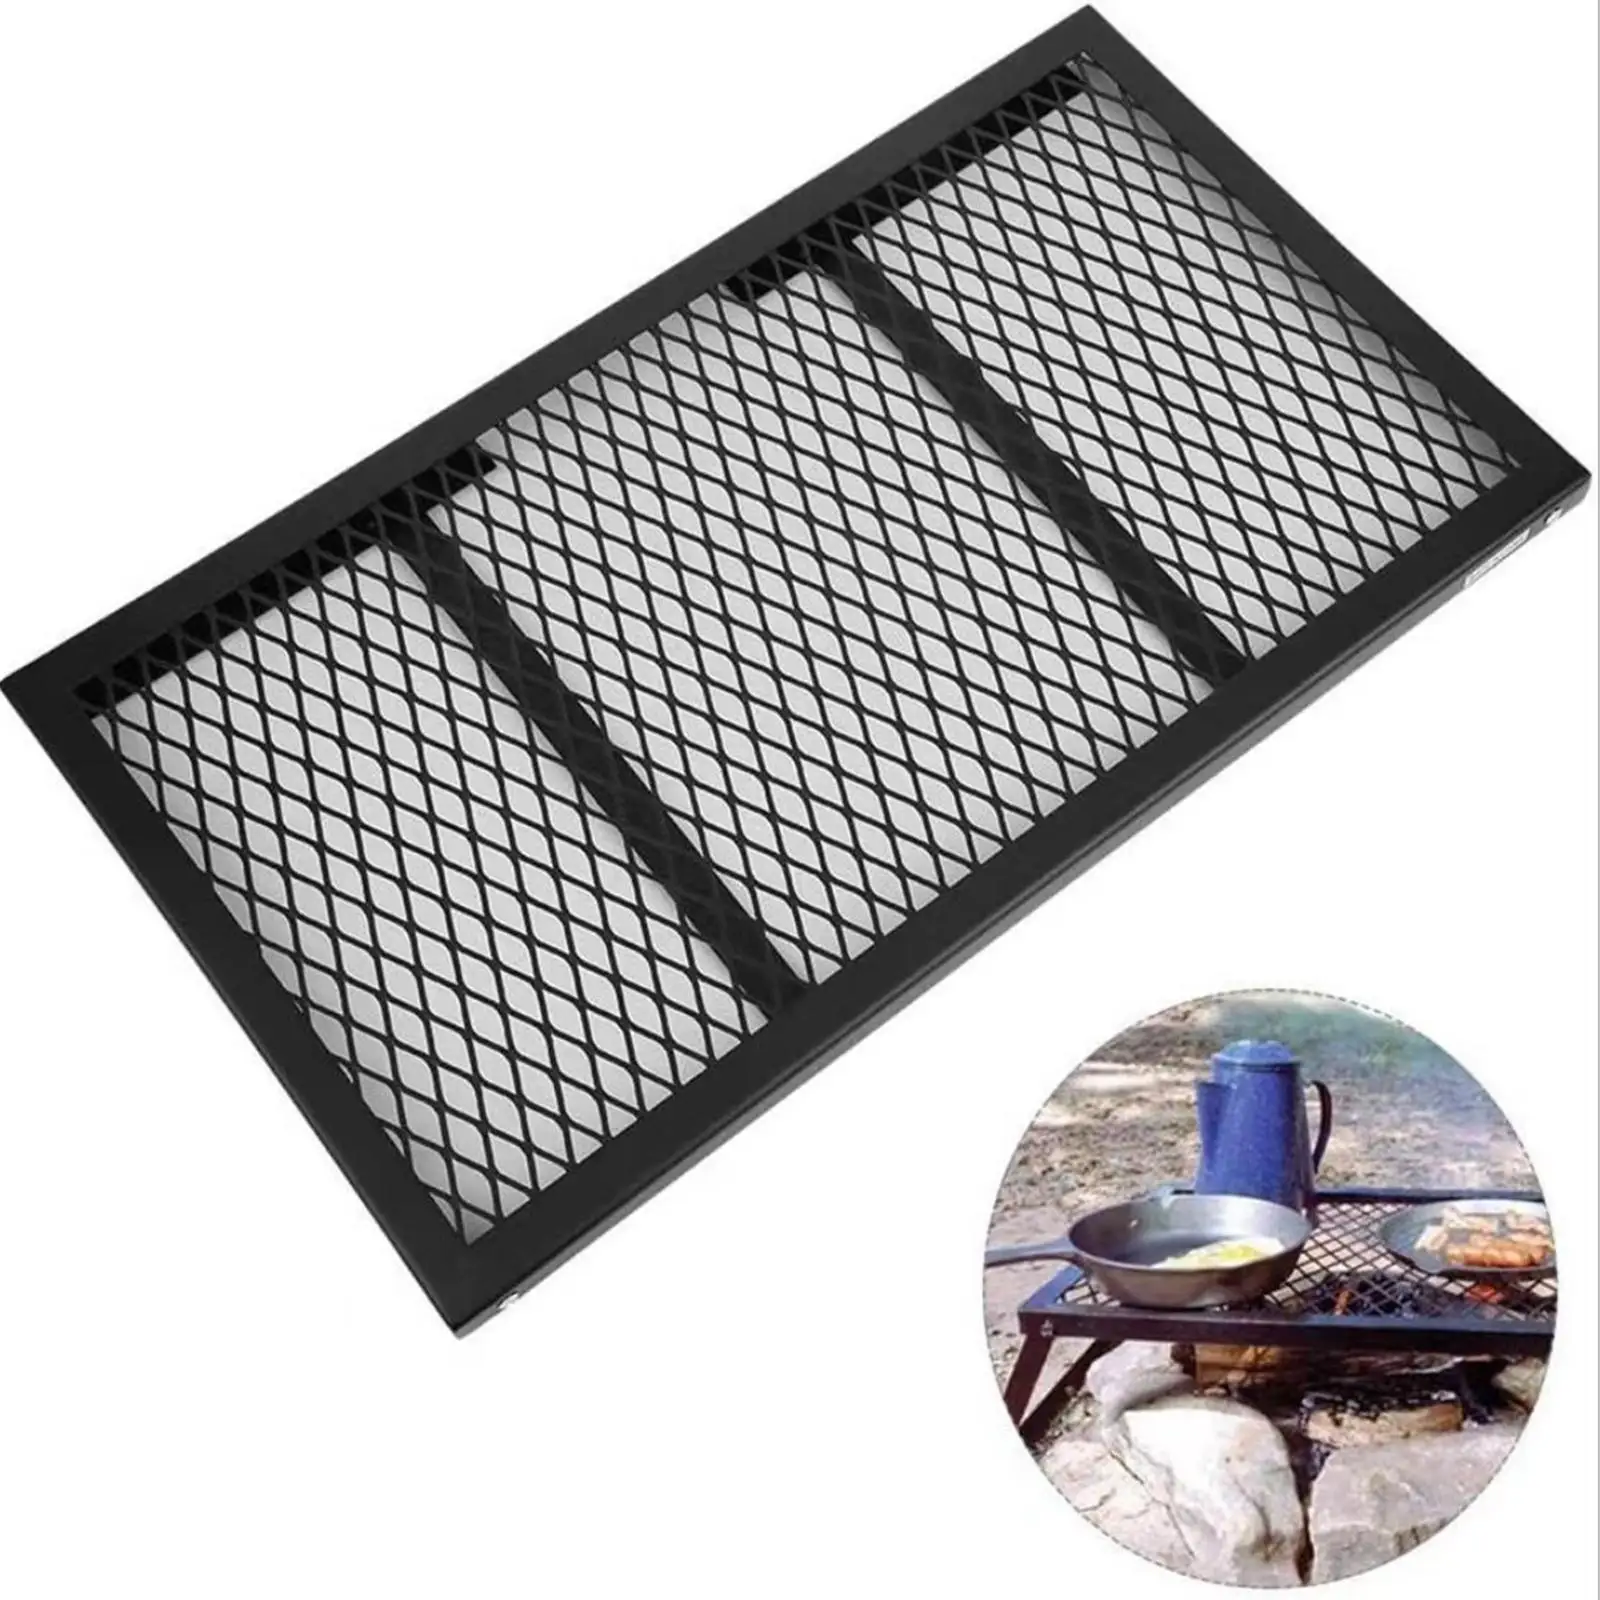 Multifunctional Barbecue Net Desk Camp Grill Rack with Foldable Legs Folding Mesh Table for Fishing Camping Backyard Travel BBQ